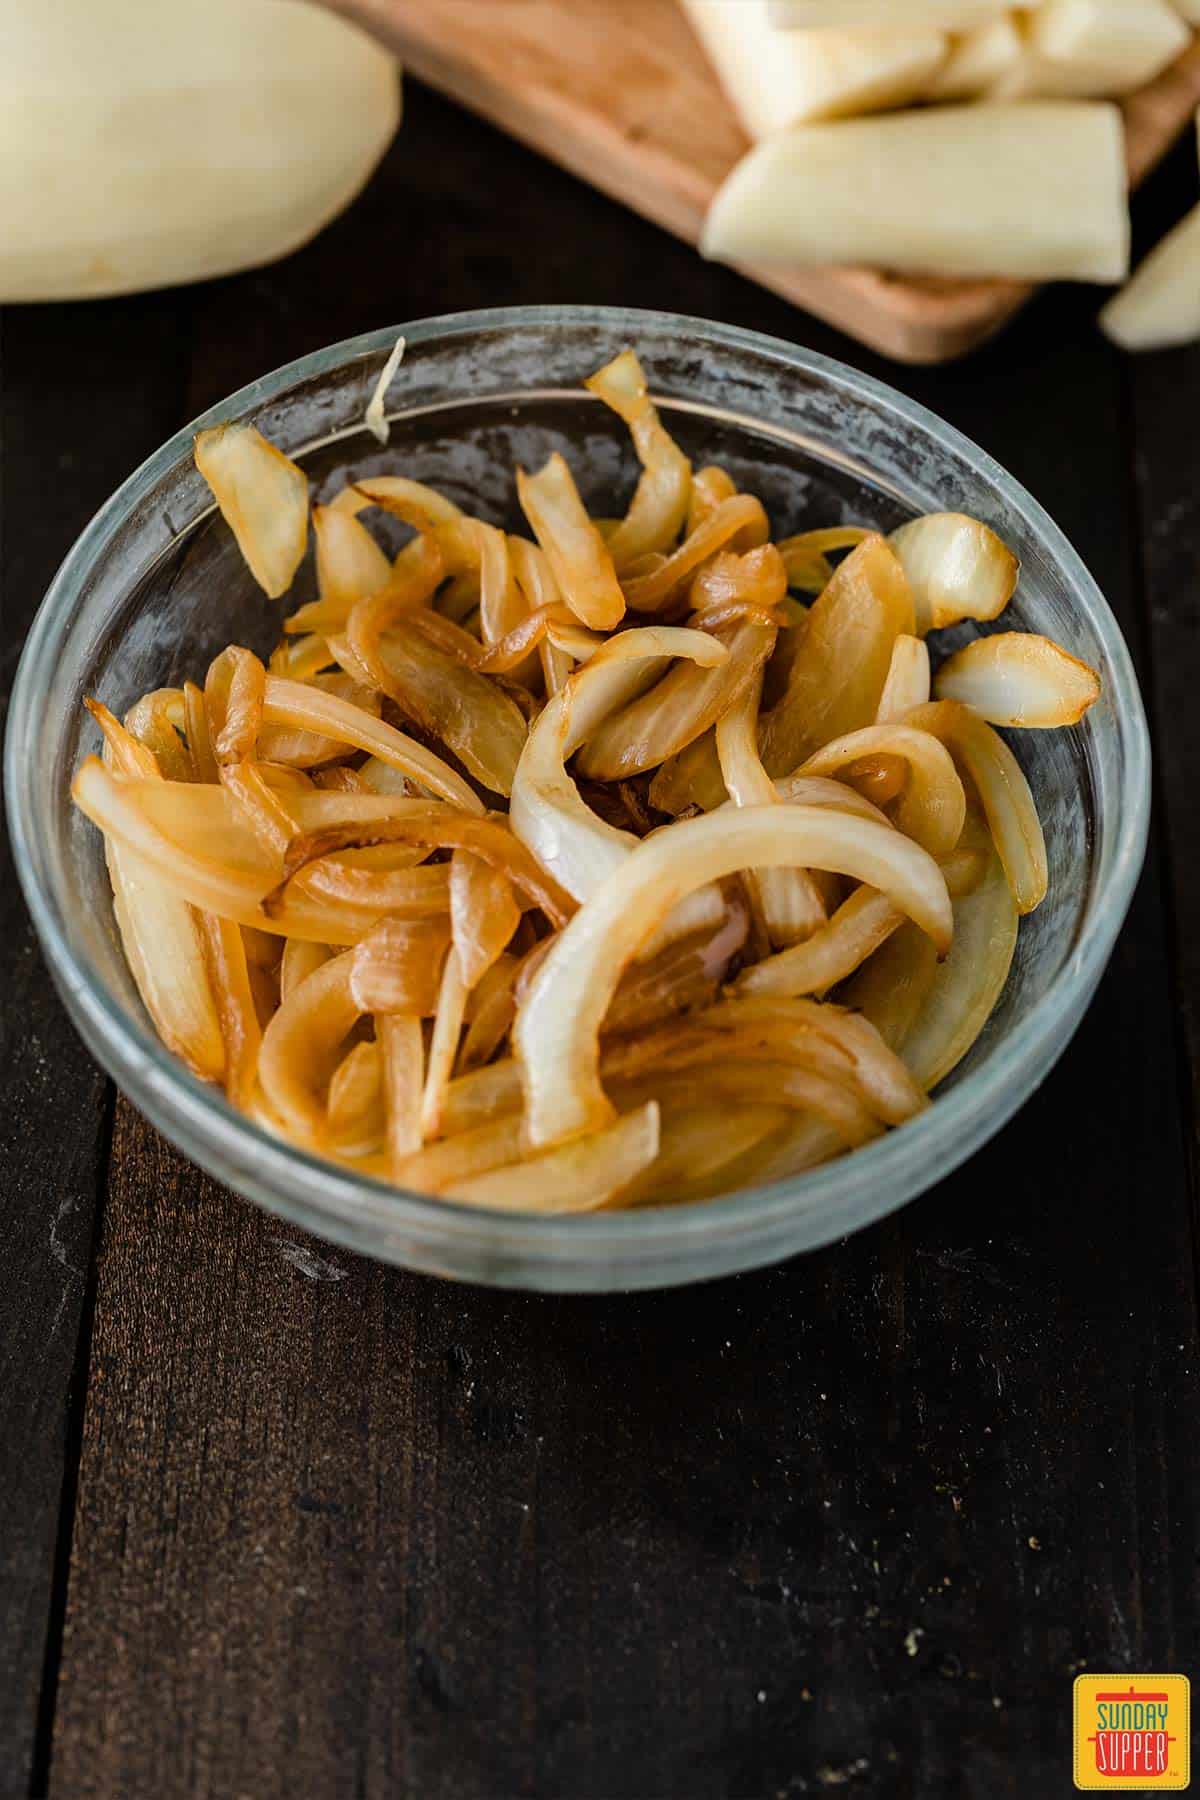 Sauteed onions in a glass bowl